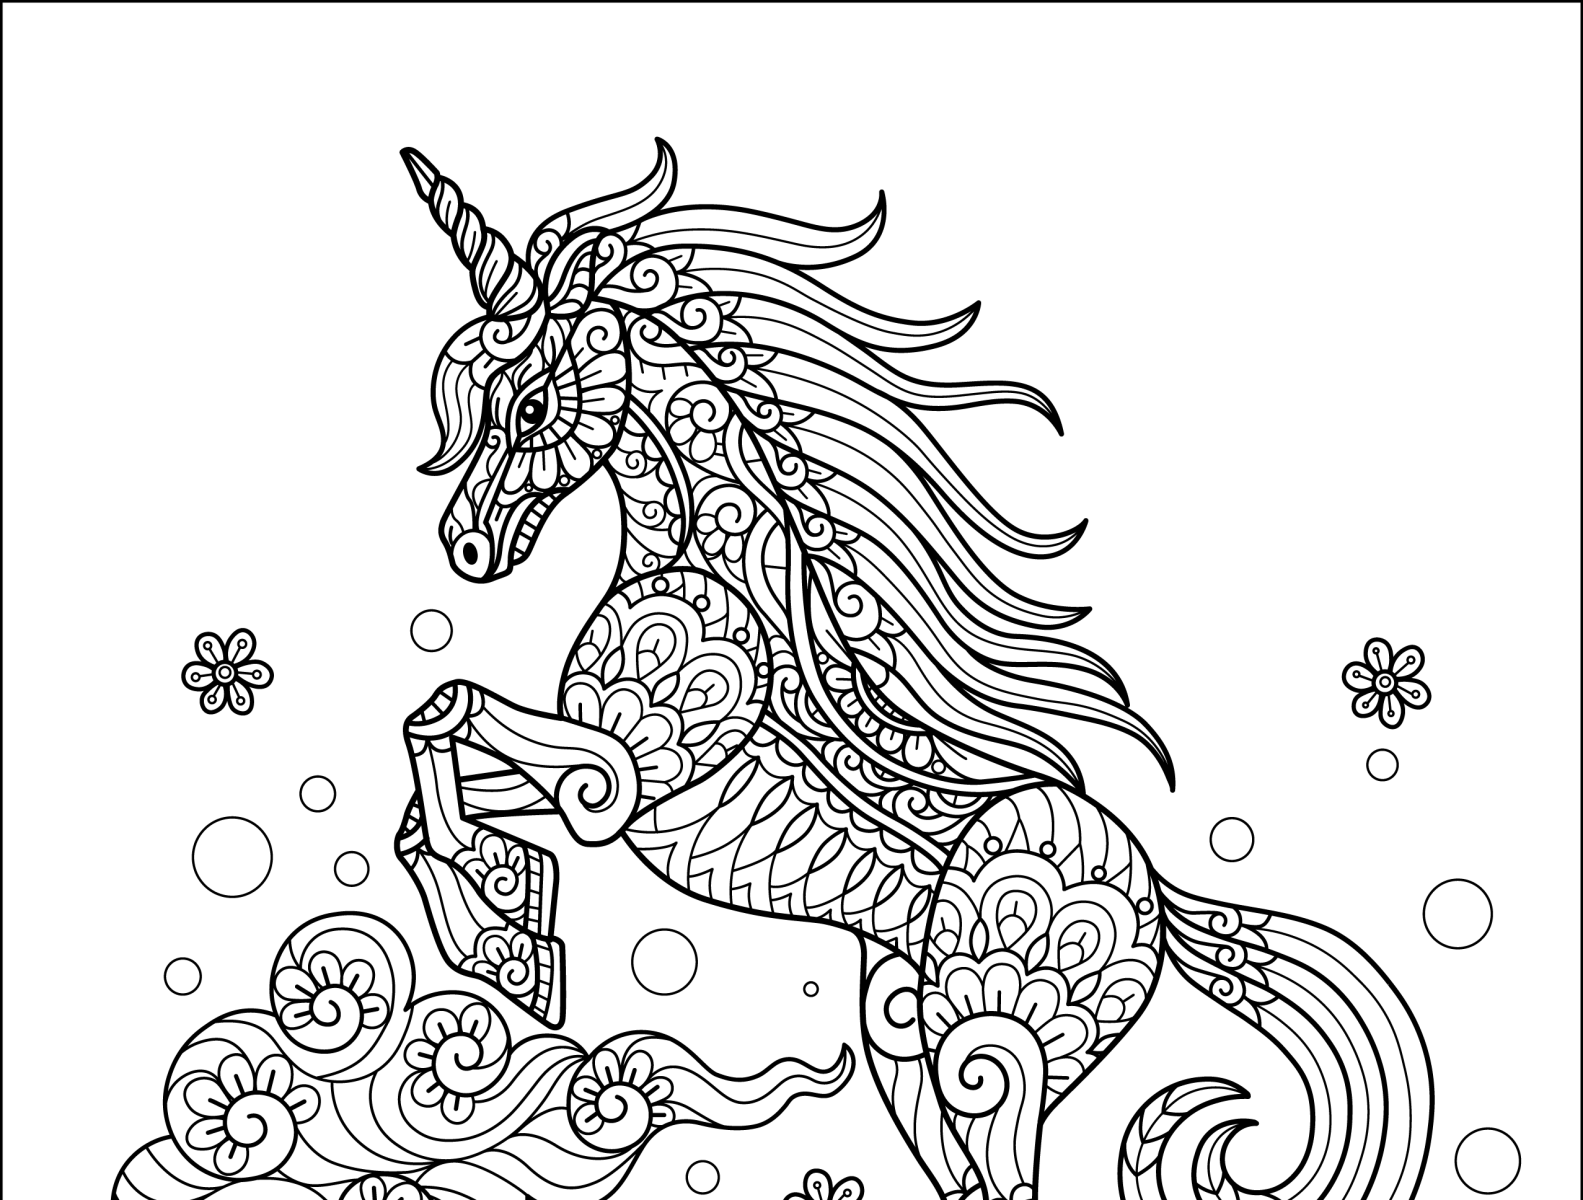 Animals Coloring book pages by dr anarul islam on Dribbble